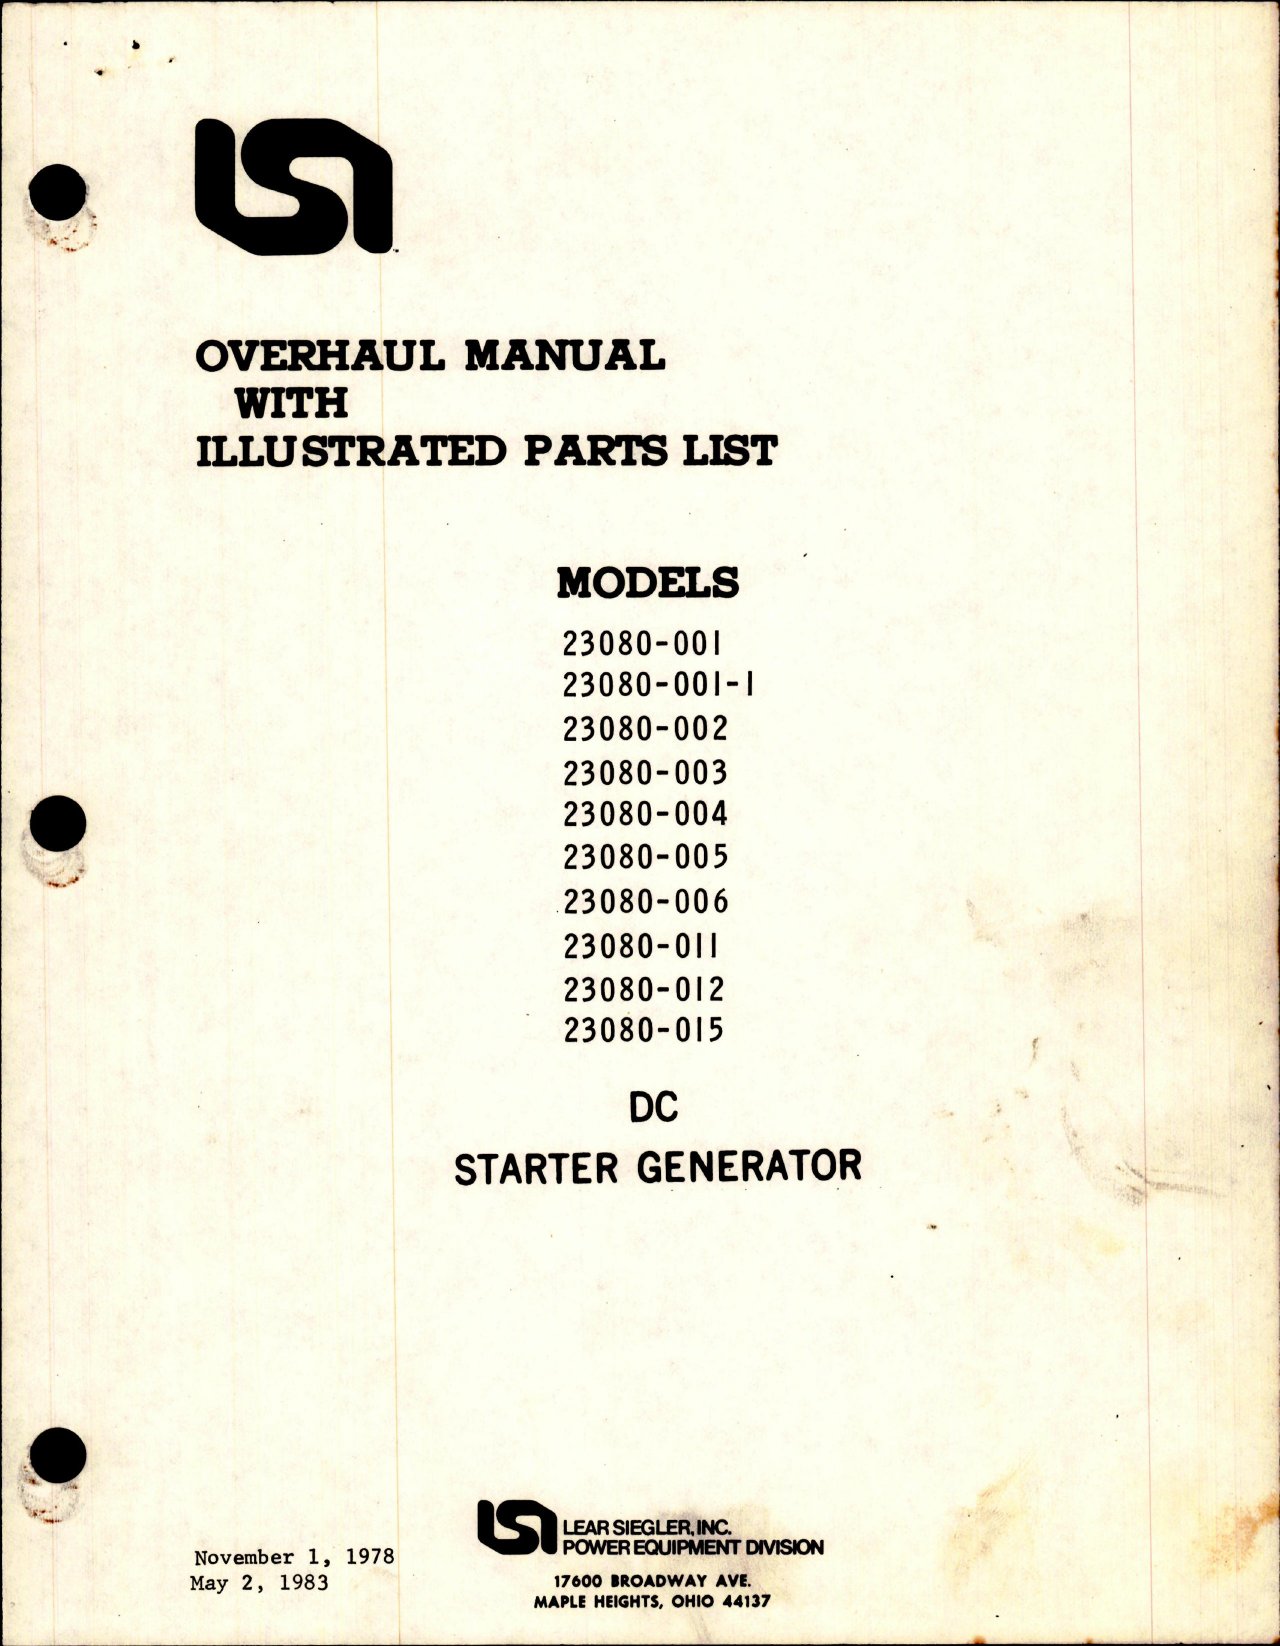 Sample page 1 from AirCorps Library document: Overhaul Manual with Illustrated Parts List for DC Starter Generator - Part 23080 Series